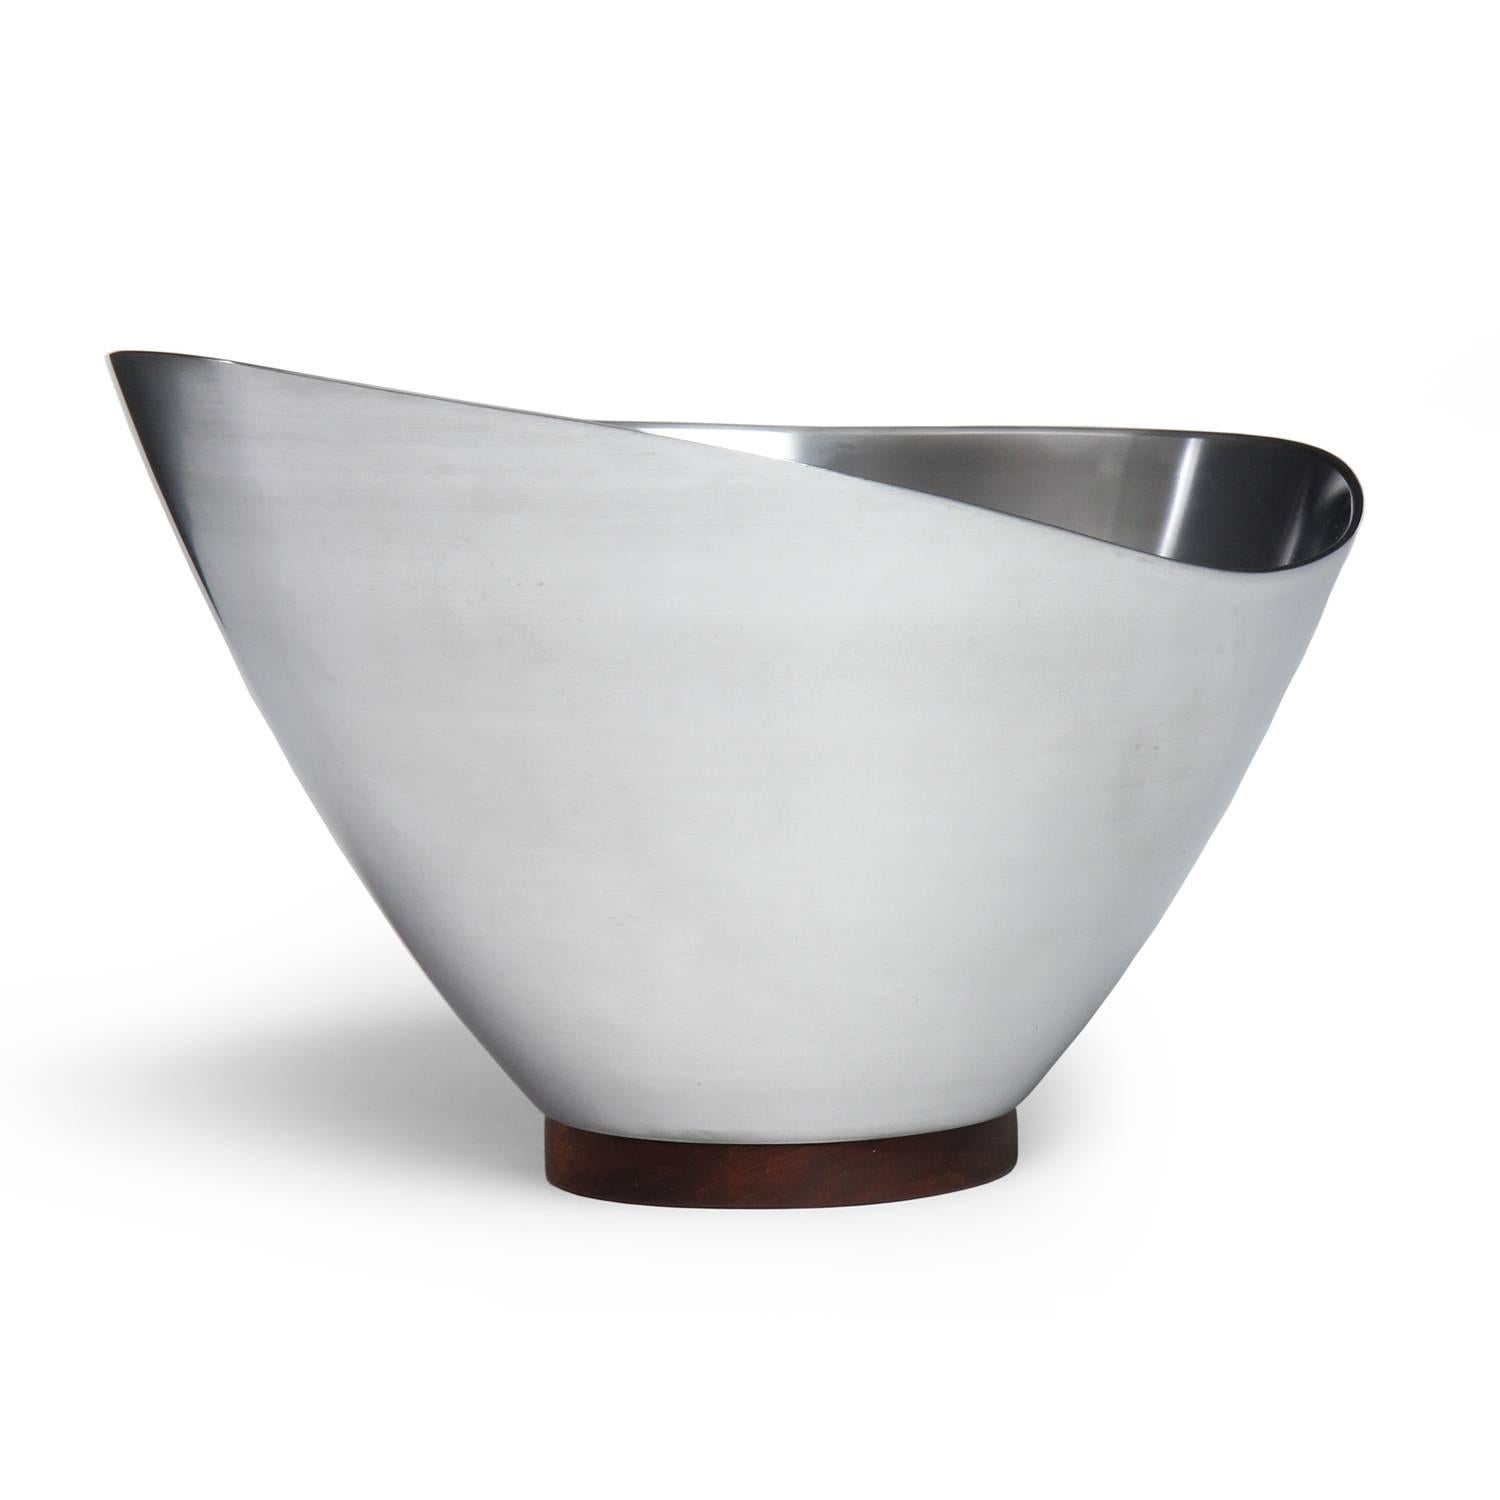 A well scaled and finely rendered spun steel bowl having an organic undulating edge and perched on a walnut foot.